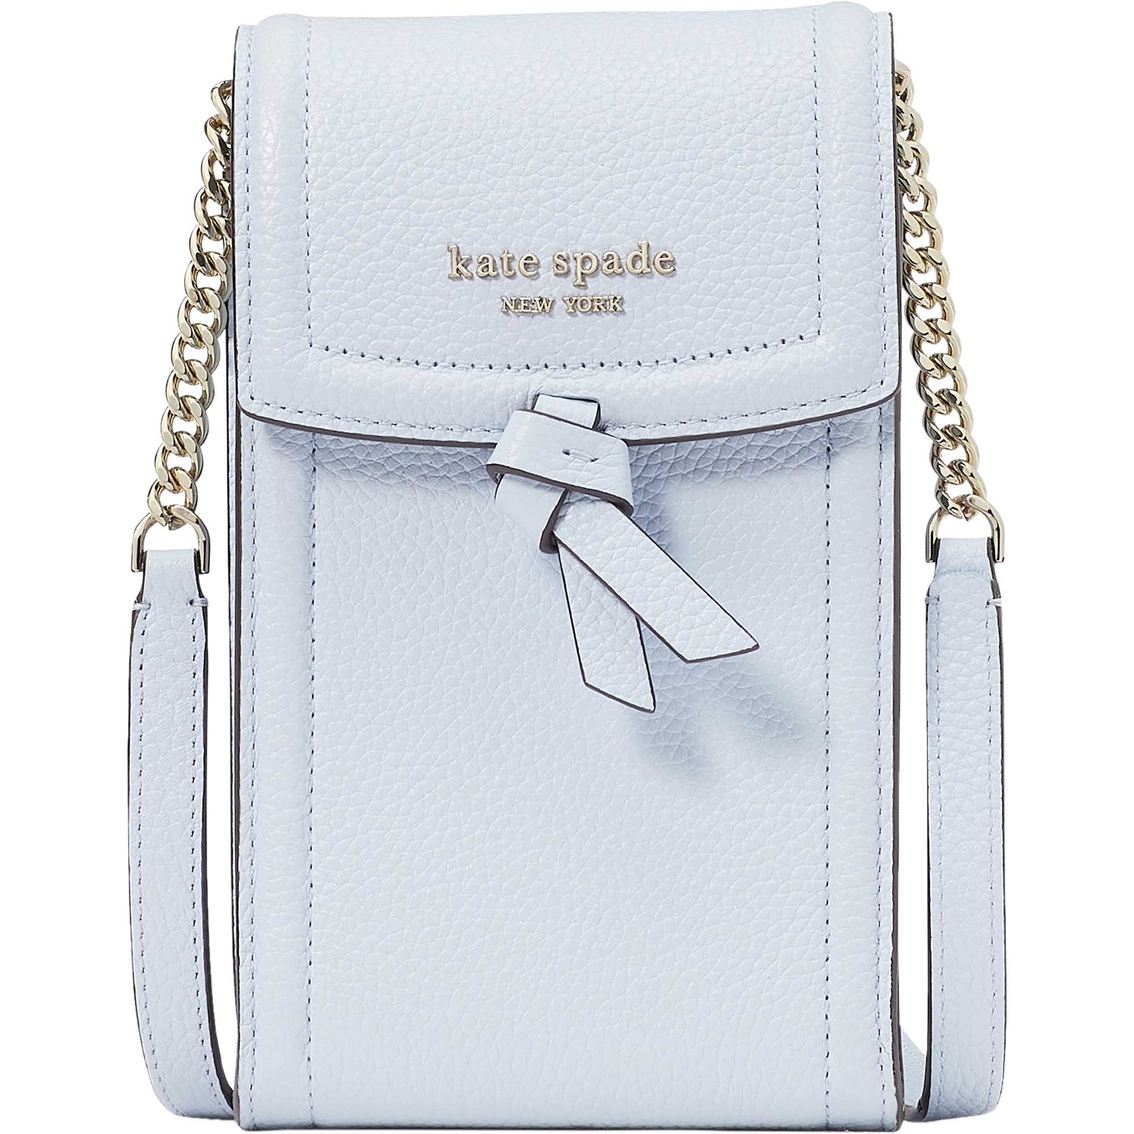 Kate Spade New York Knott Pebbled Leather North South Phone Crossbody, Crossbody Bags, Clothing & Accessories